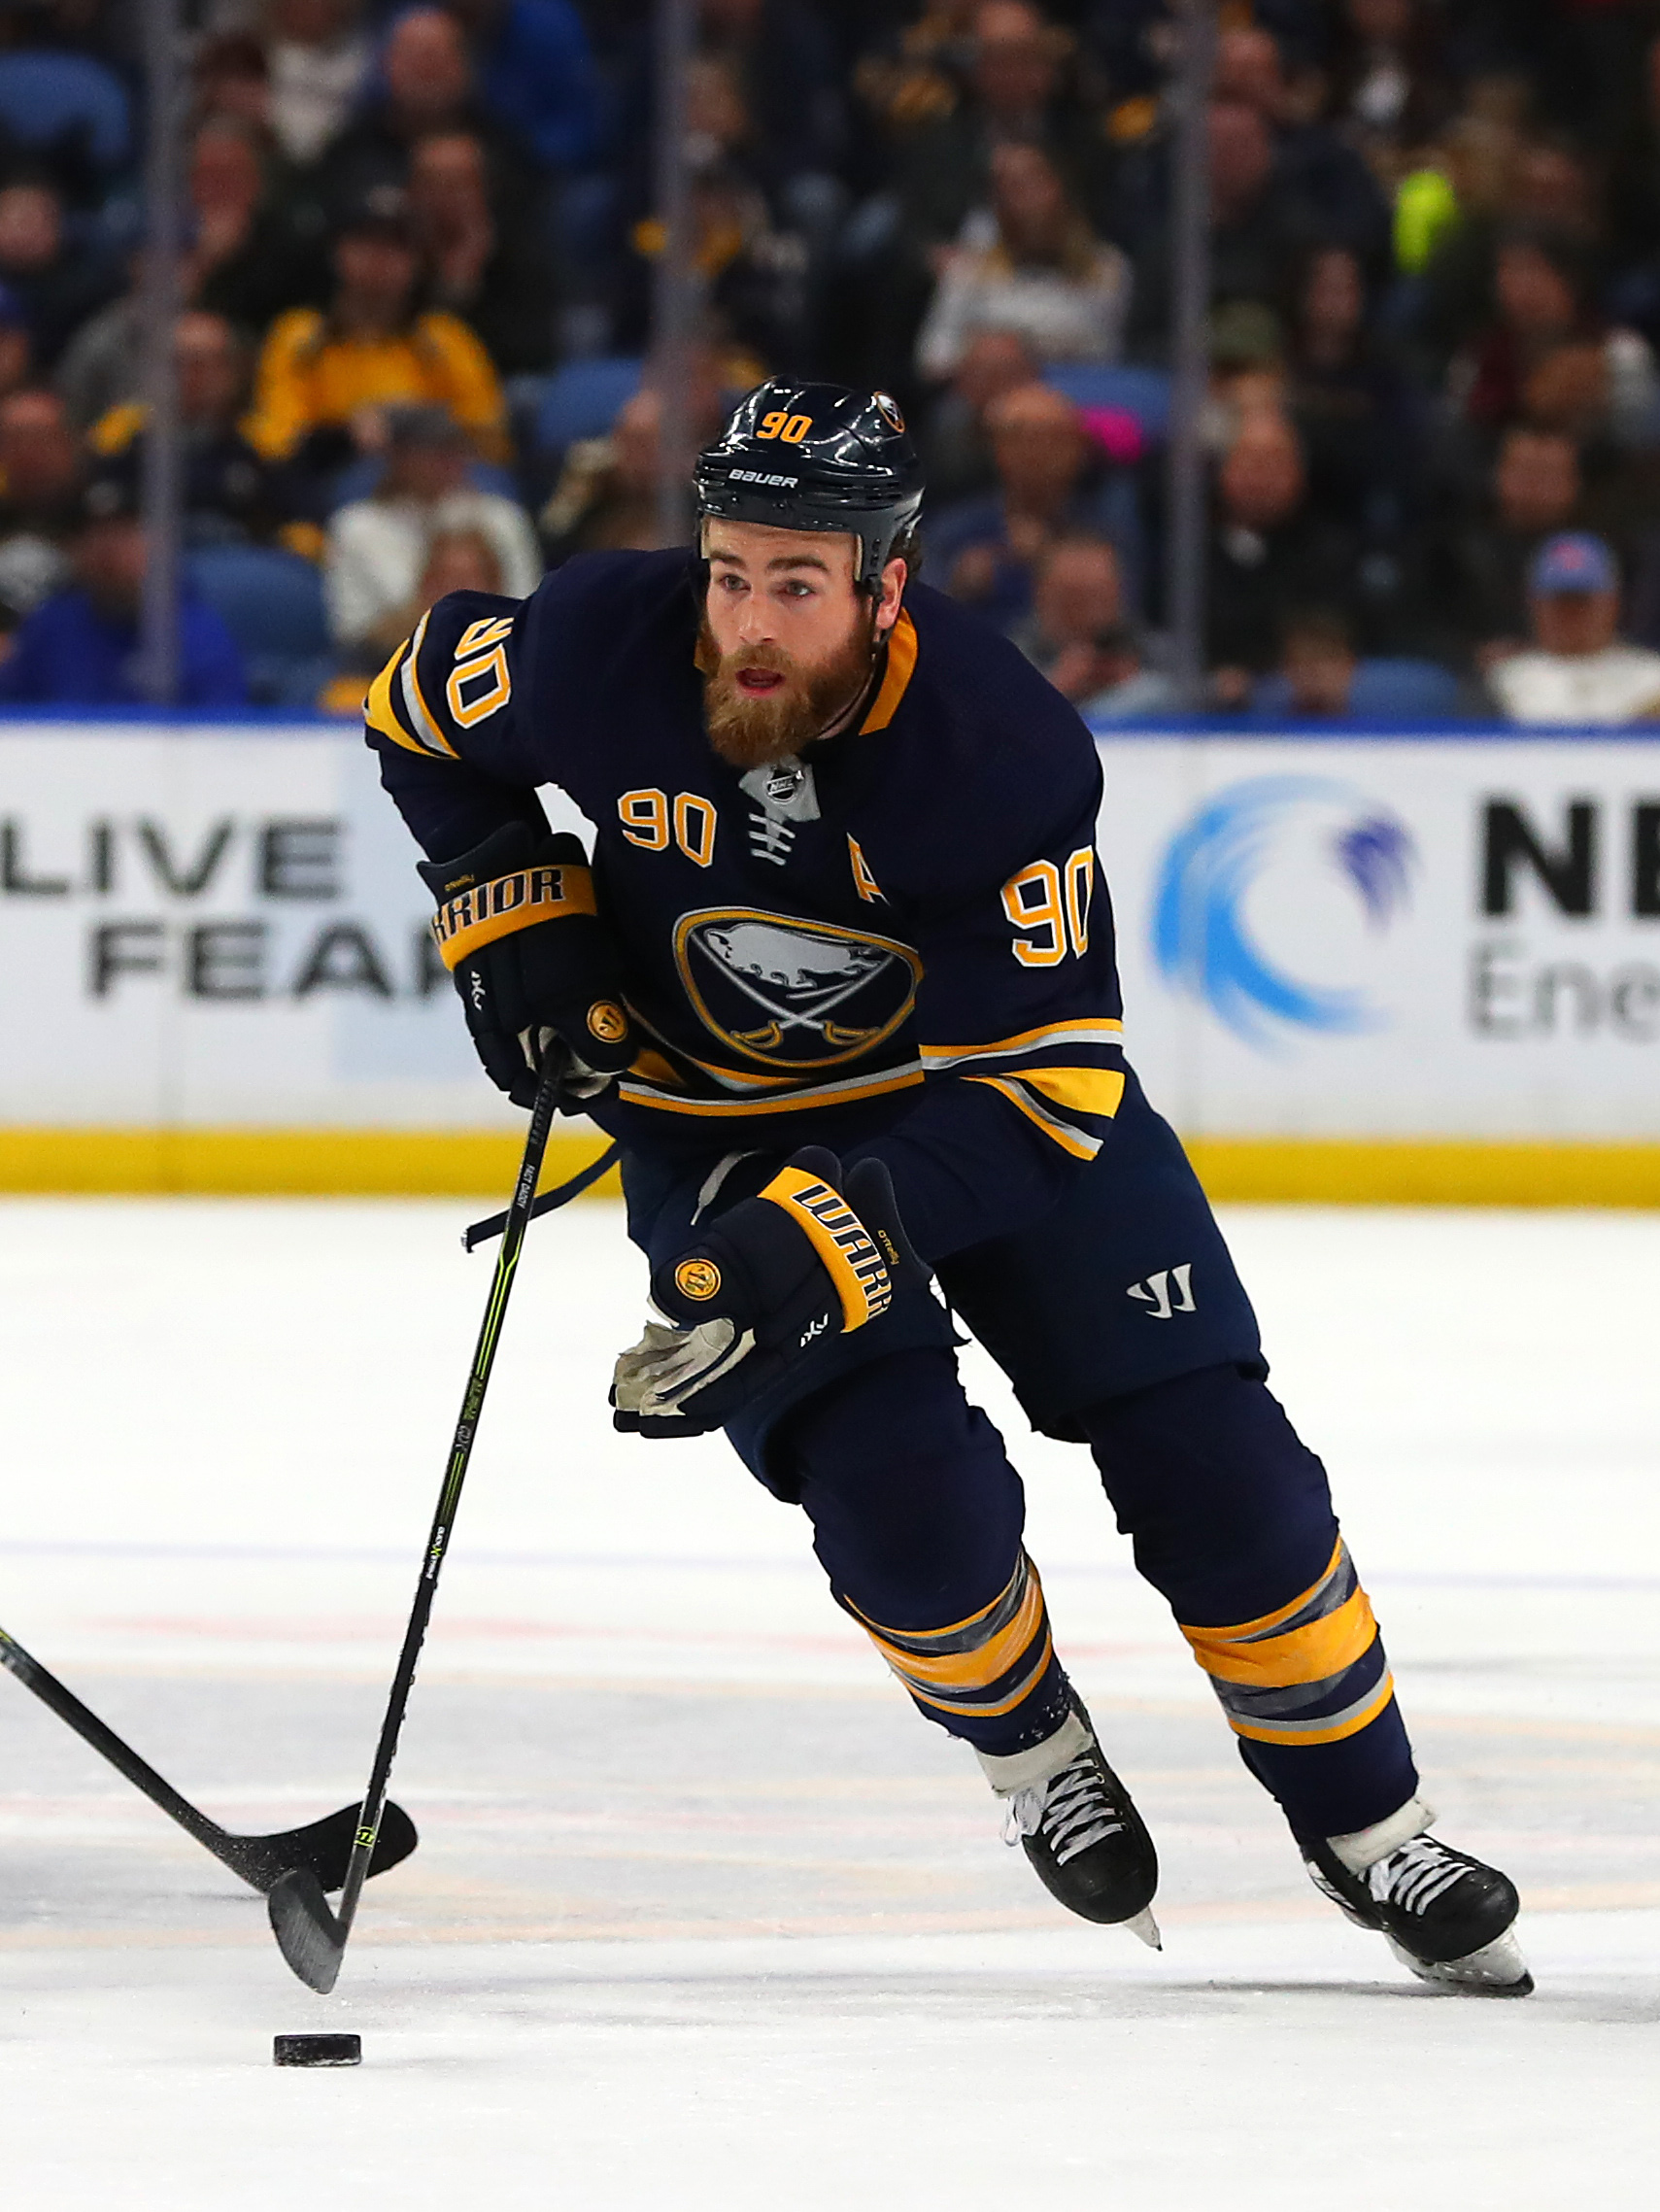 St. Louis Blues - Joining Ryan O'Reilly and Chad Johnson